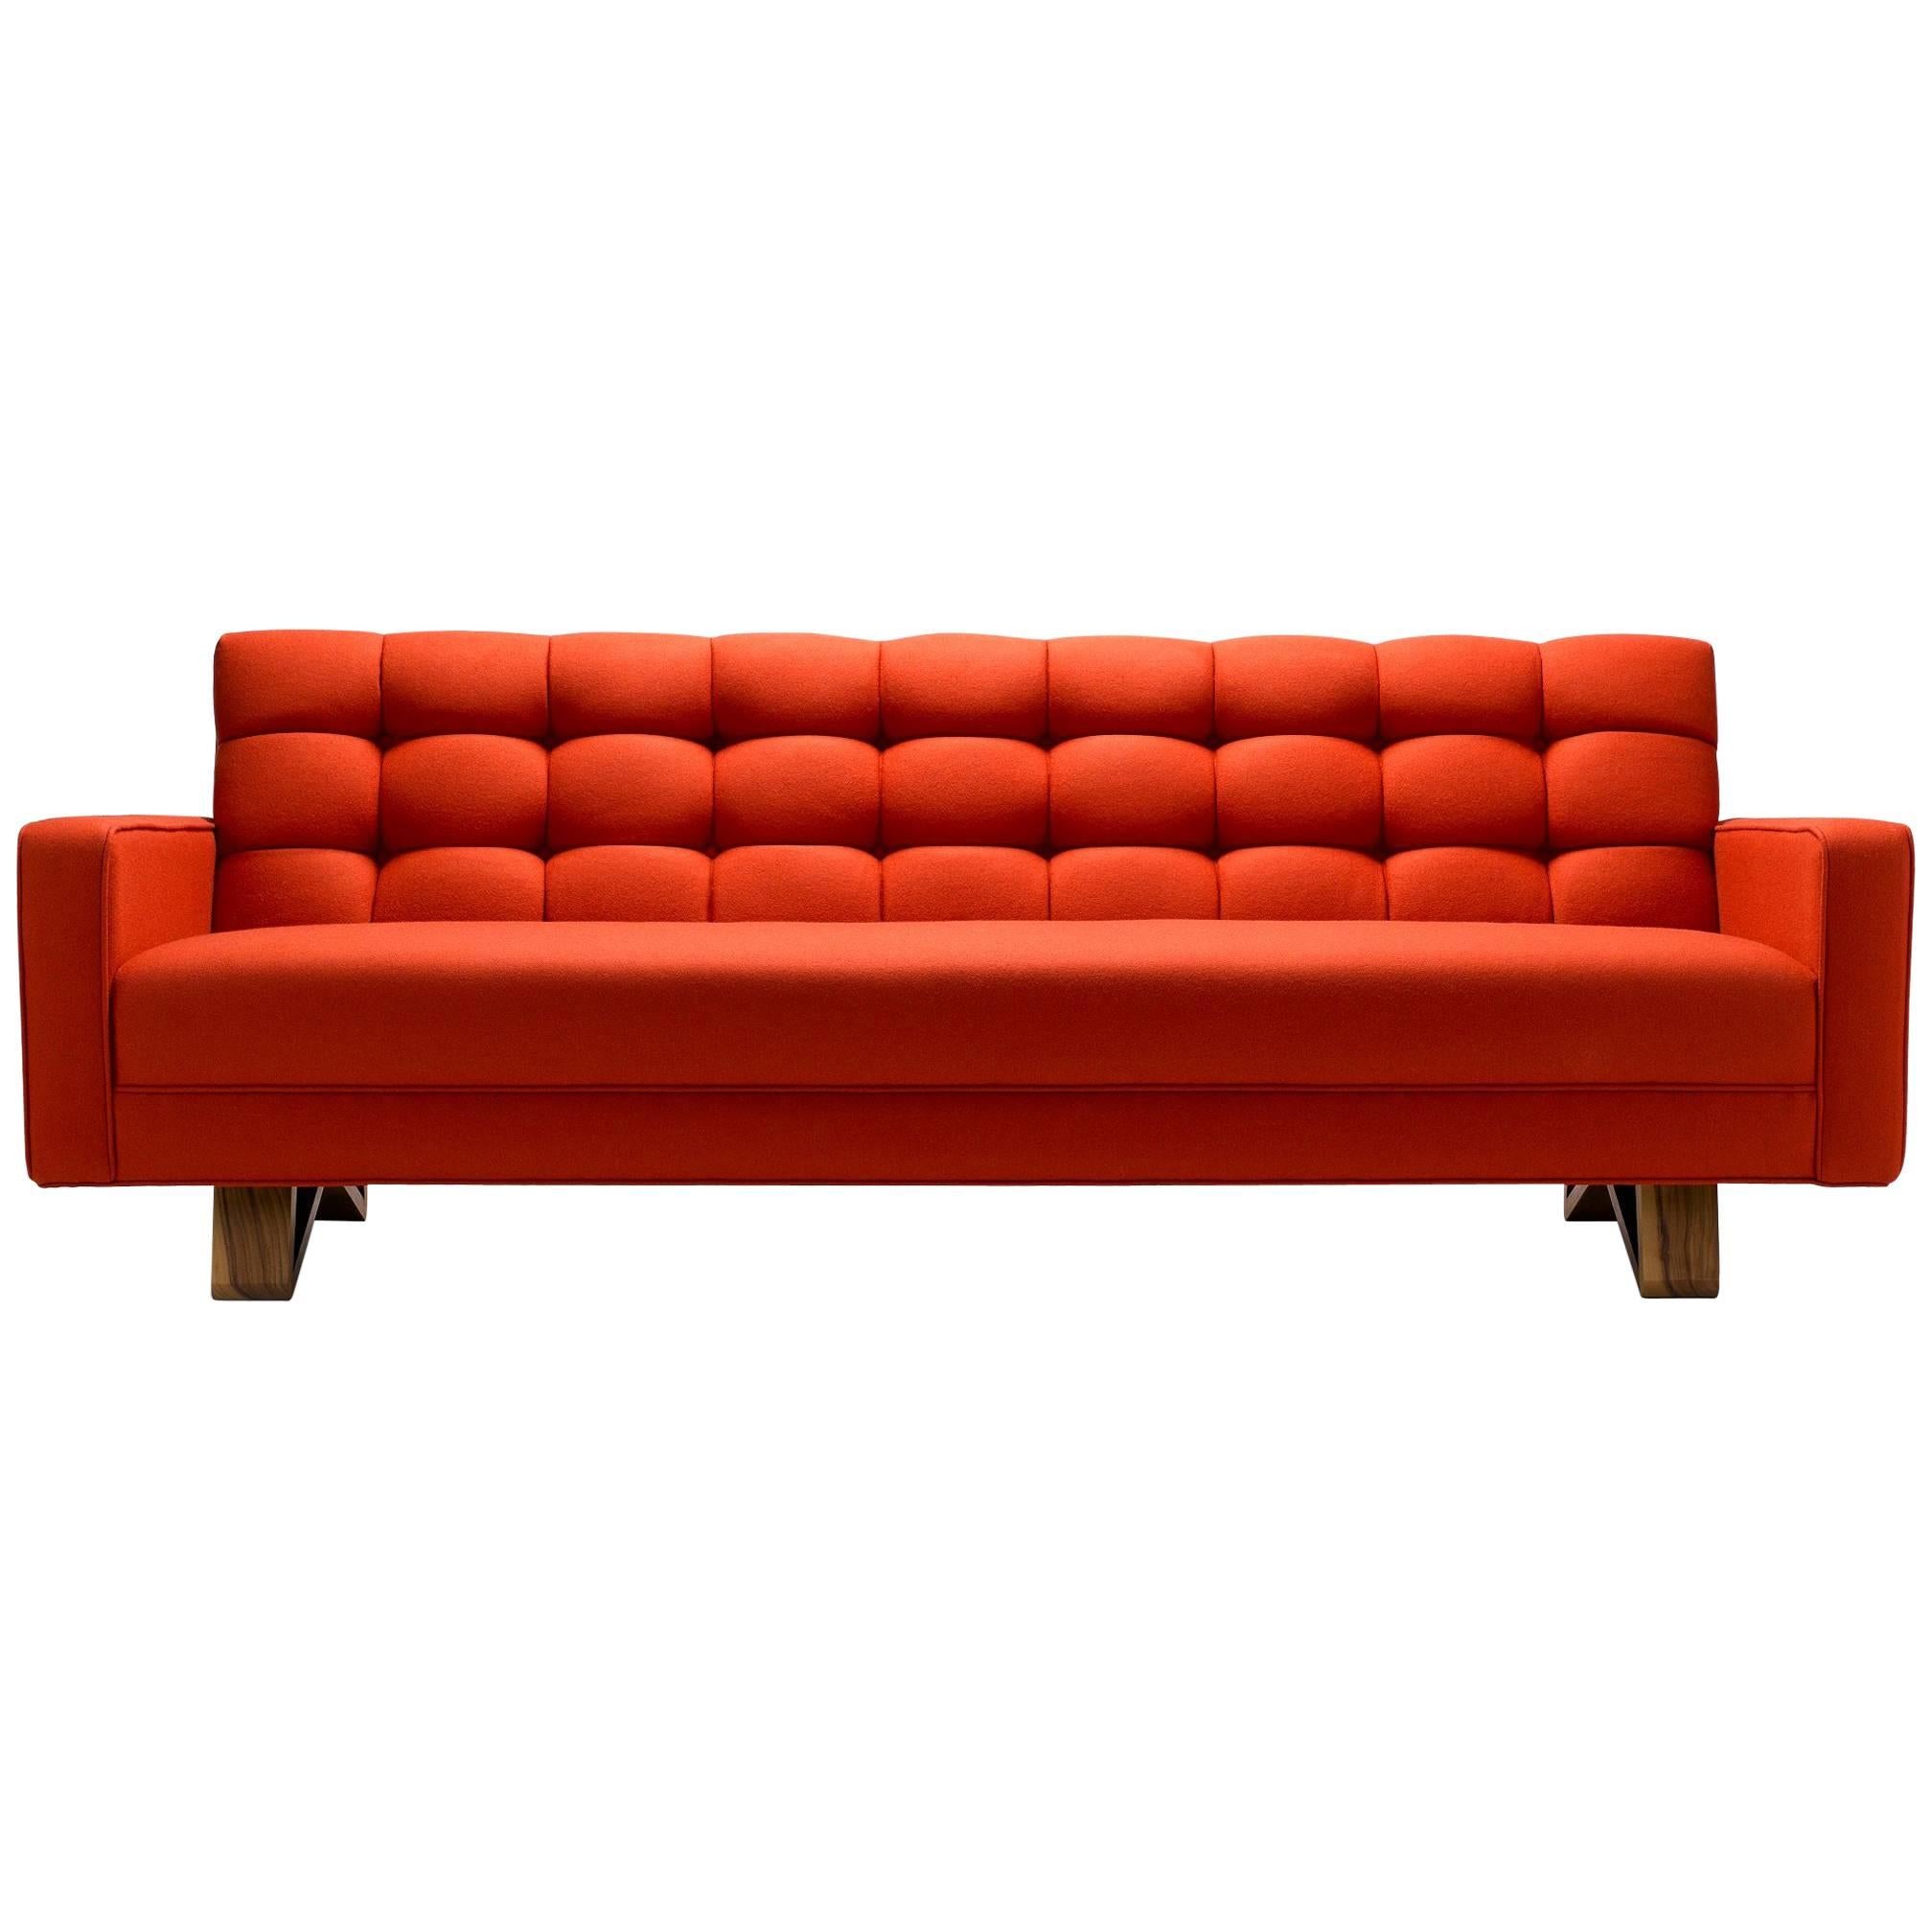 Contemporary Red Adoni Sofa in Melton Wool with Walnut Legs For Sale